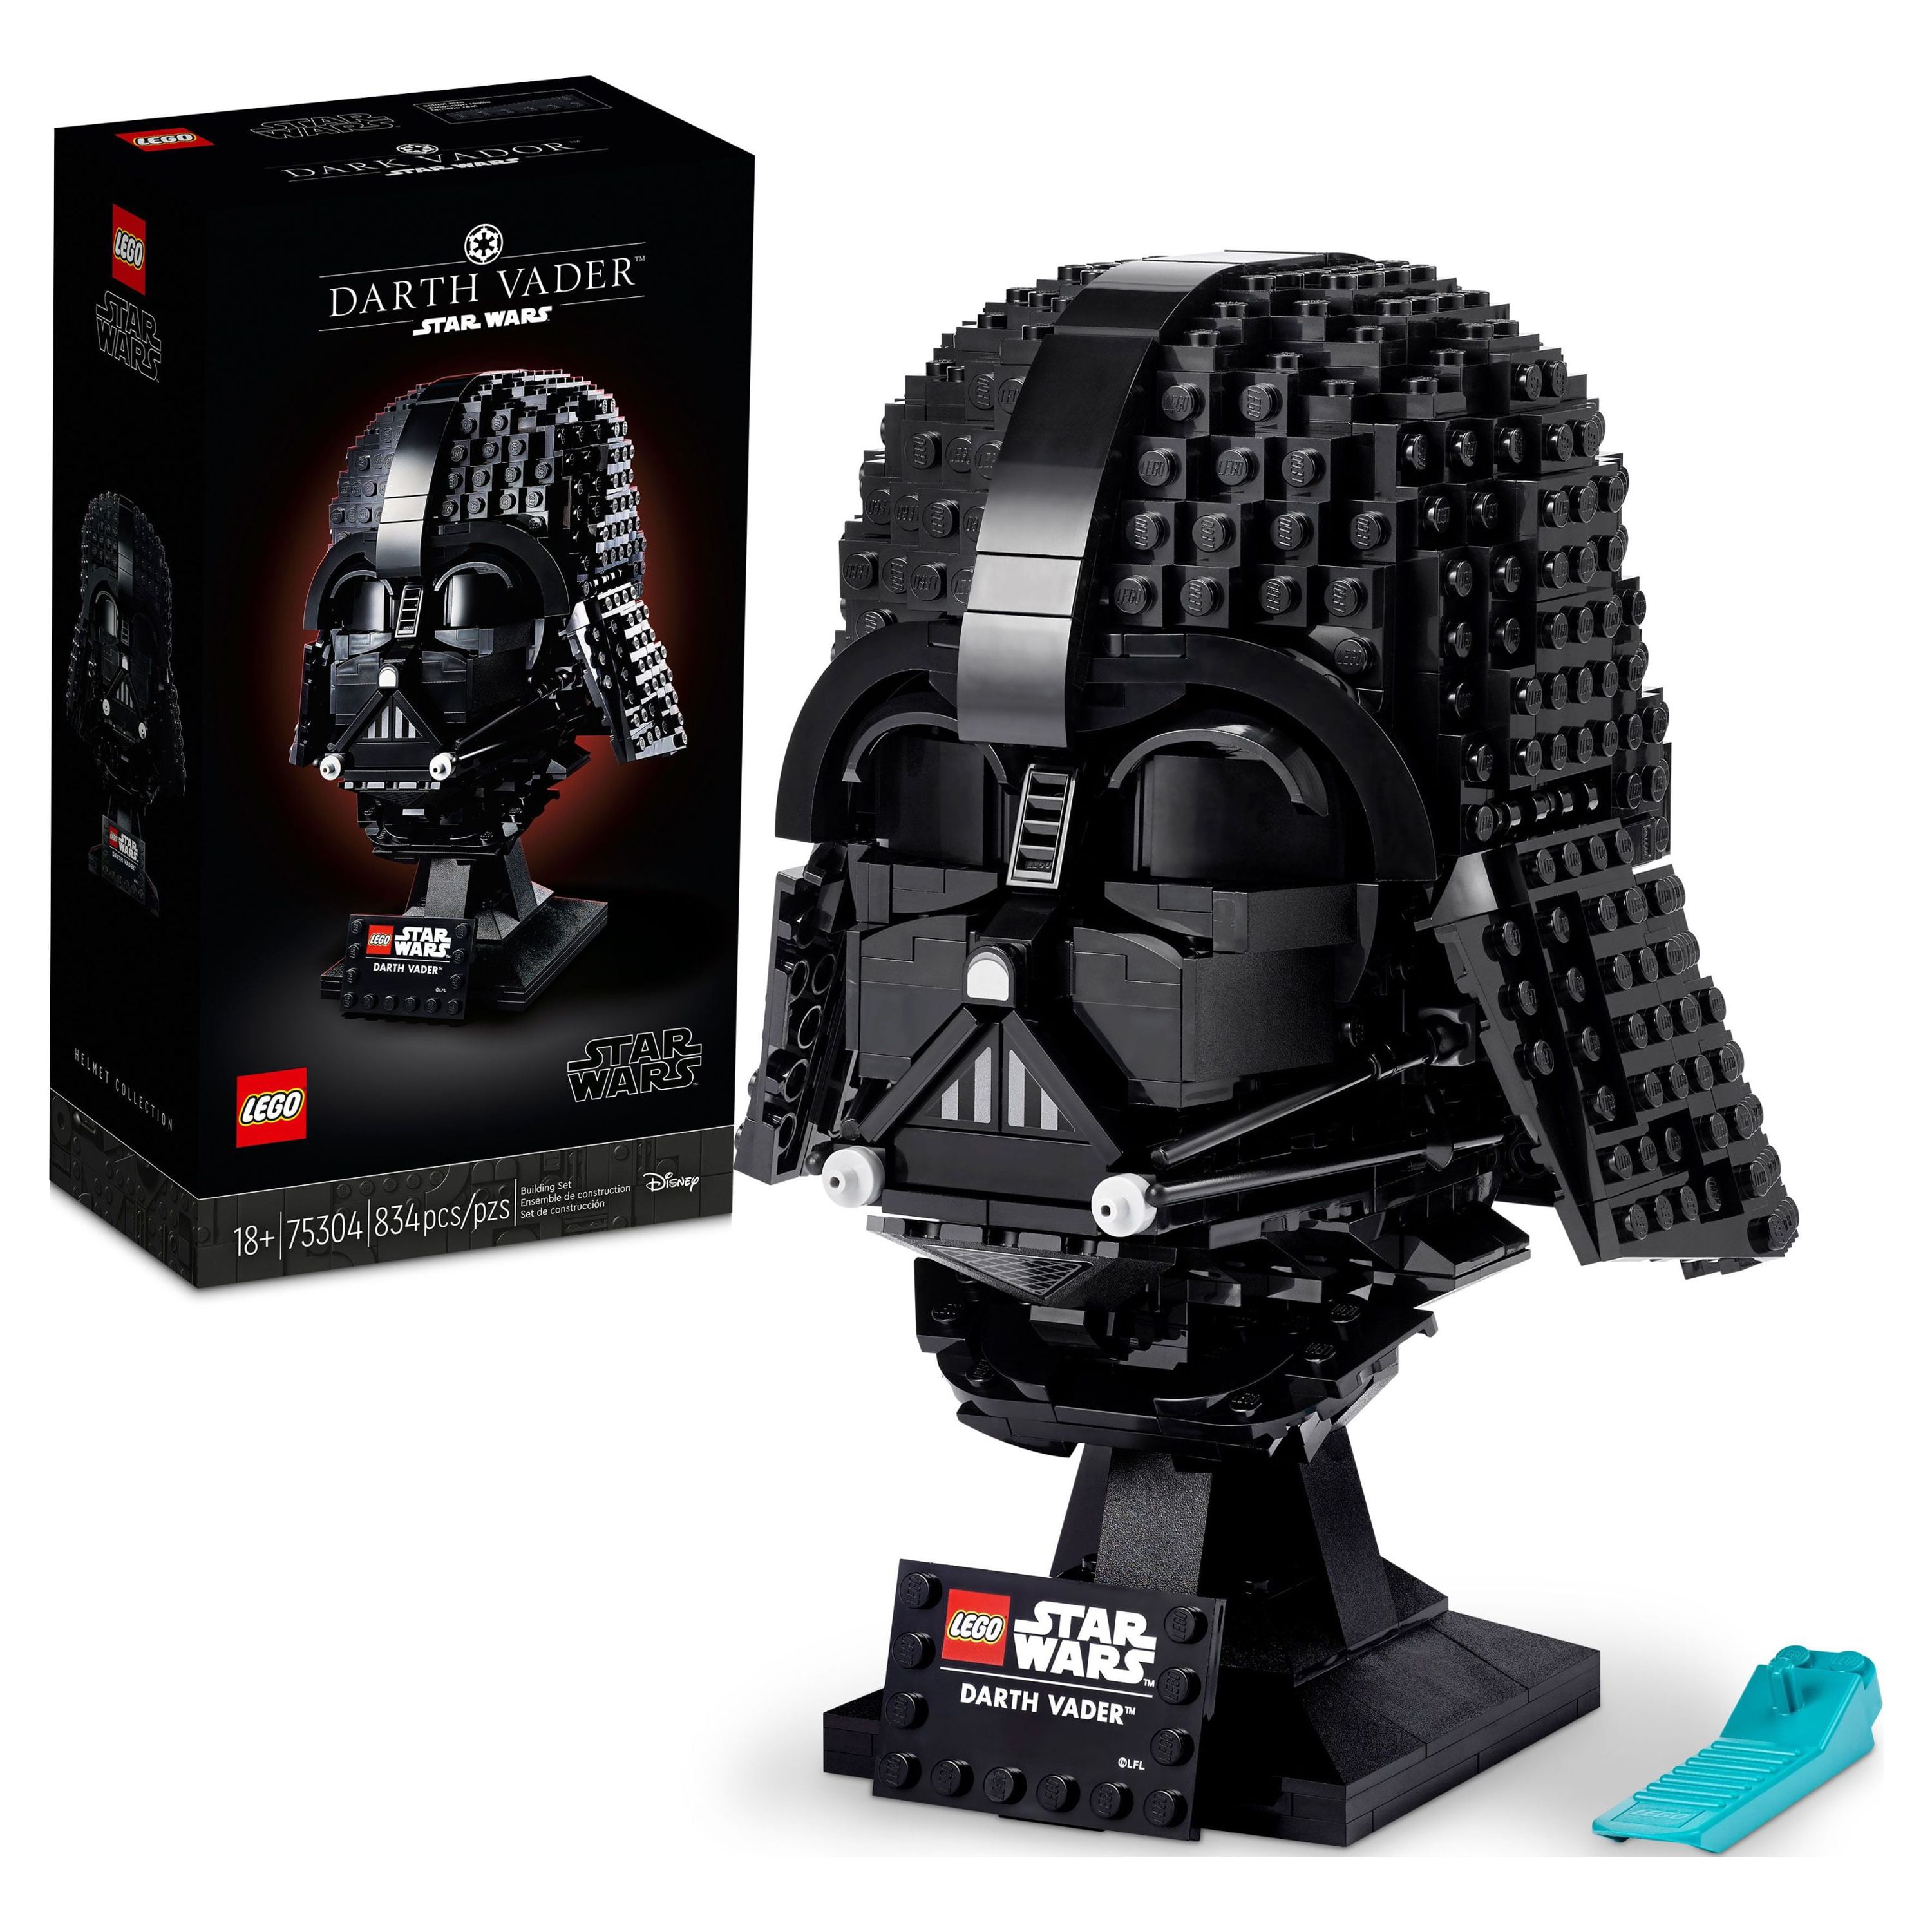 LEGO Star Wars Darth Vader Helmet 75304 Set, Mask Display Model Kit for Adults to Build, Gift Idea for Men, Women, Him or Her, Collectible Home Decor Model - image 1 of 8